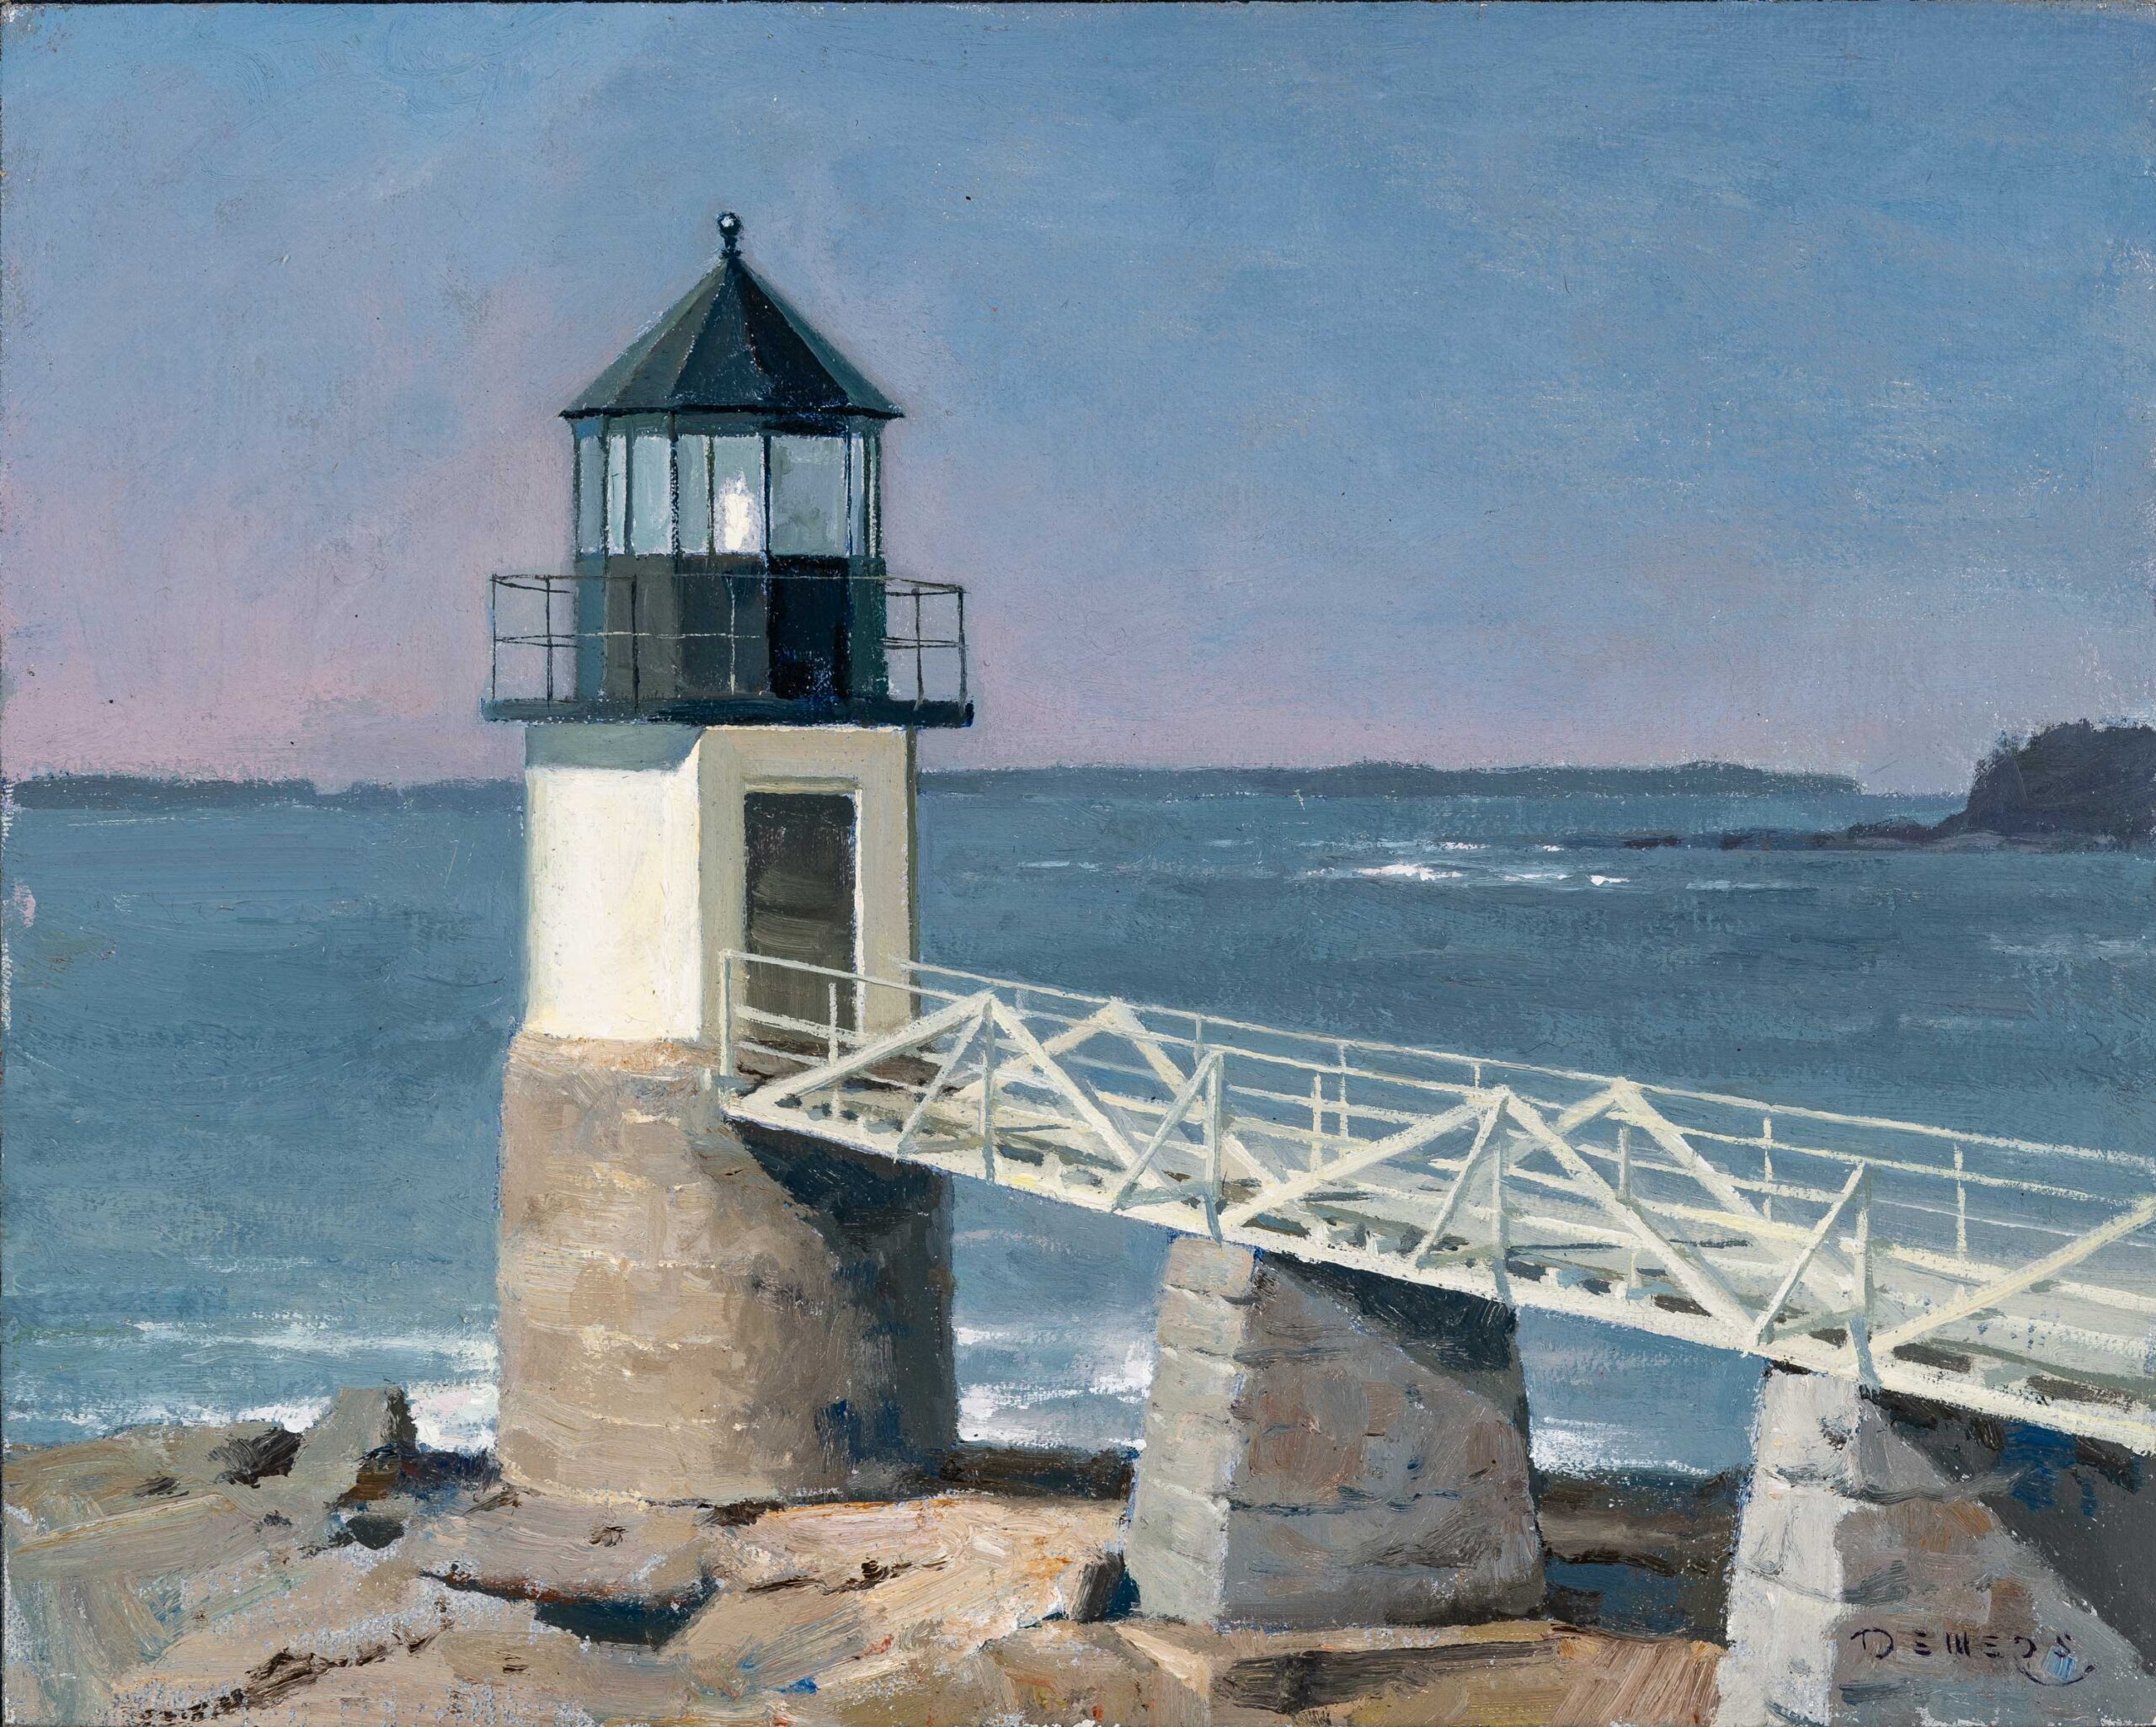 Marine art - Don Demers, “Marshall Point Light,” 2018, oil, 8 x 10 in., Private collection, Plein air